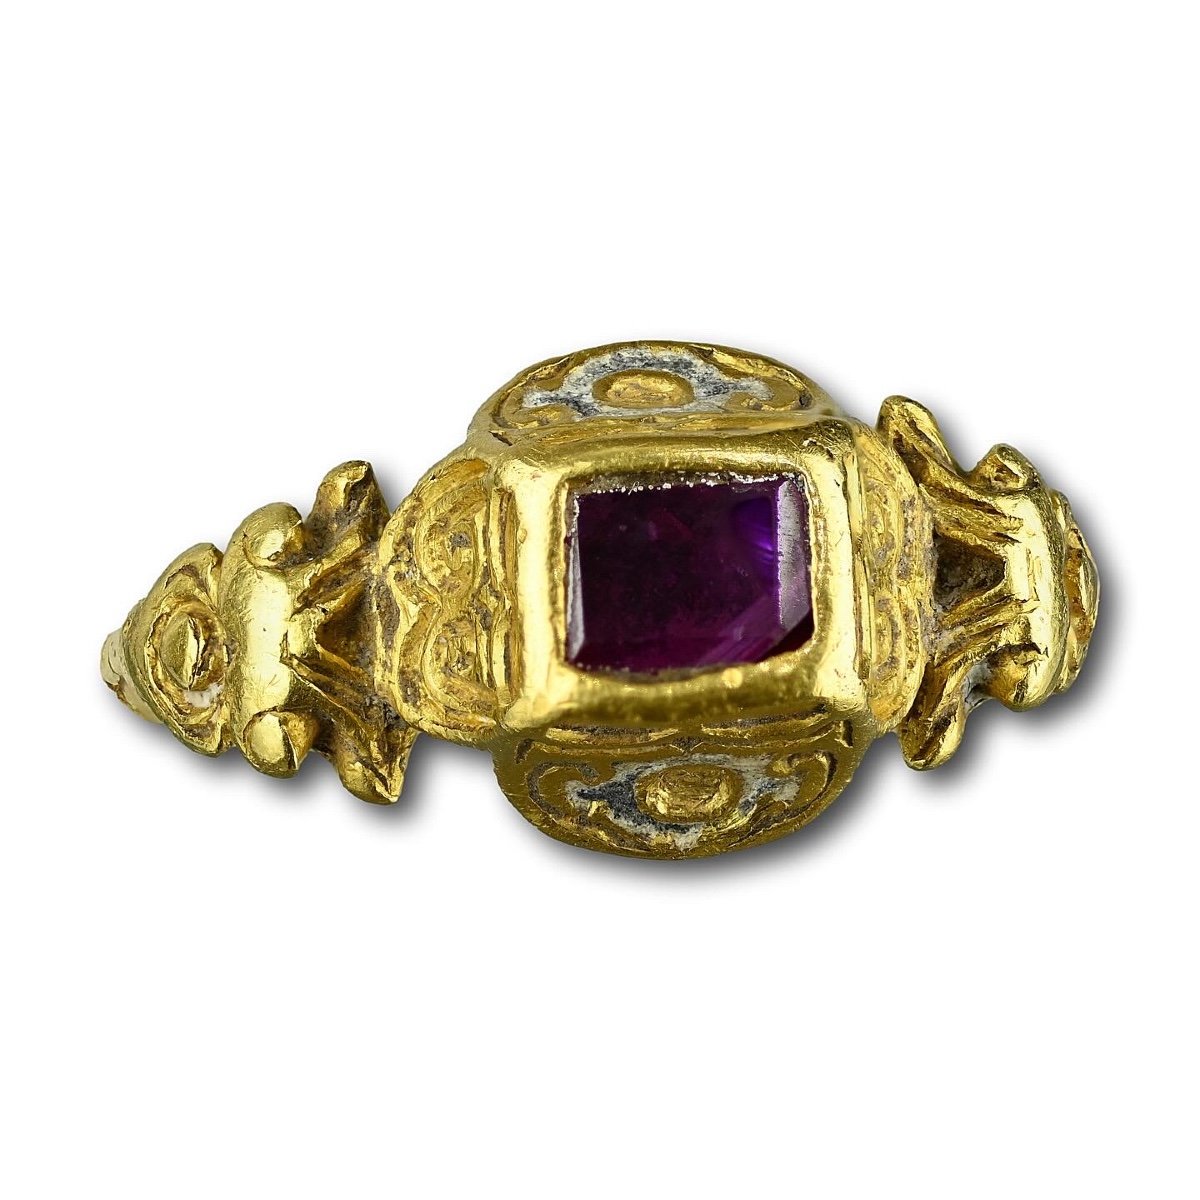 Renaissance Gold And Enamel Ring Set With A Ruby. Western Europe, 16th Century.-photo-3